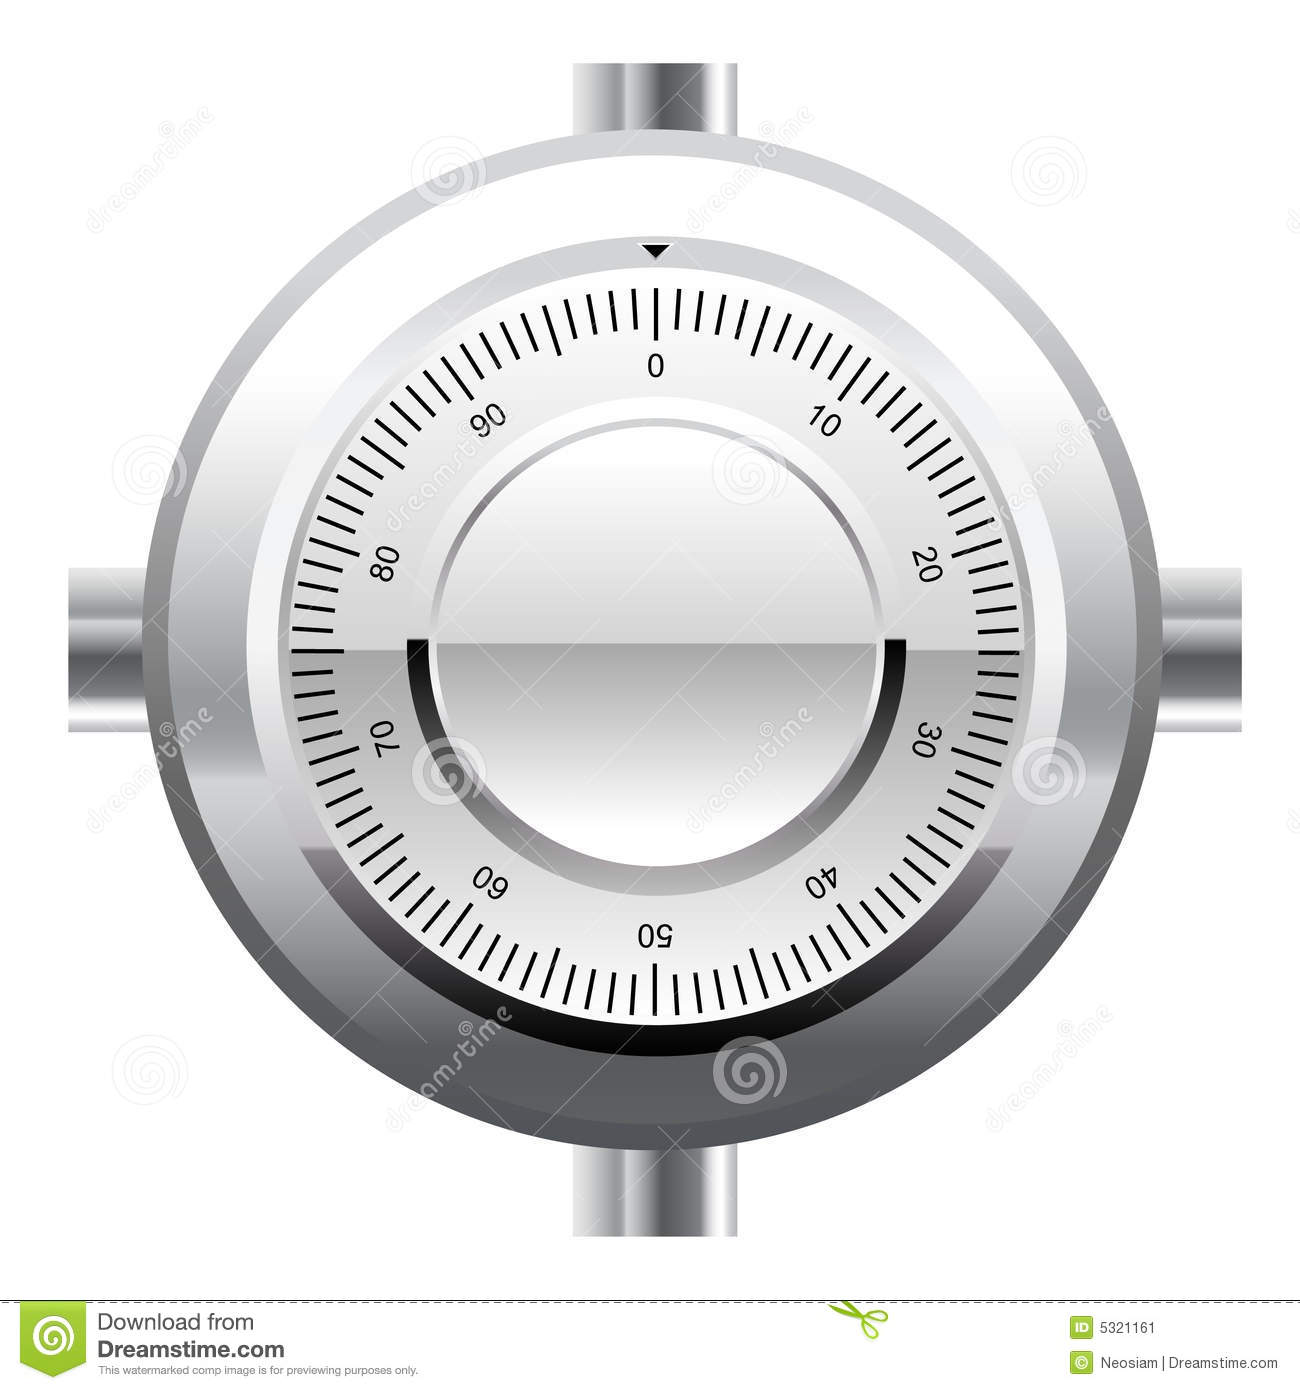 Safe Dial Stock Image   Image  5321161